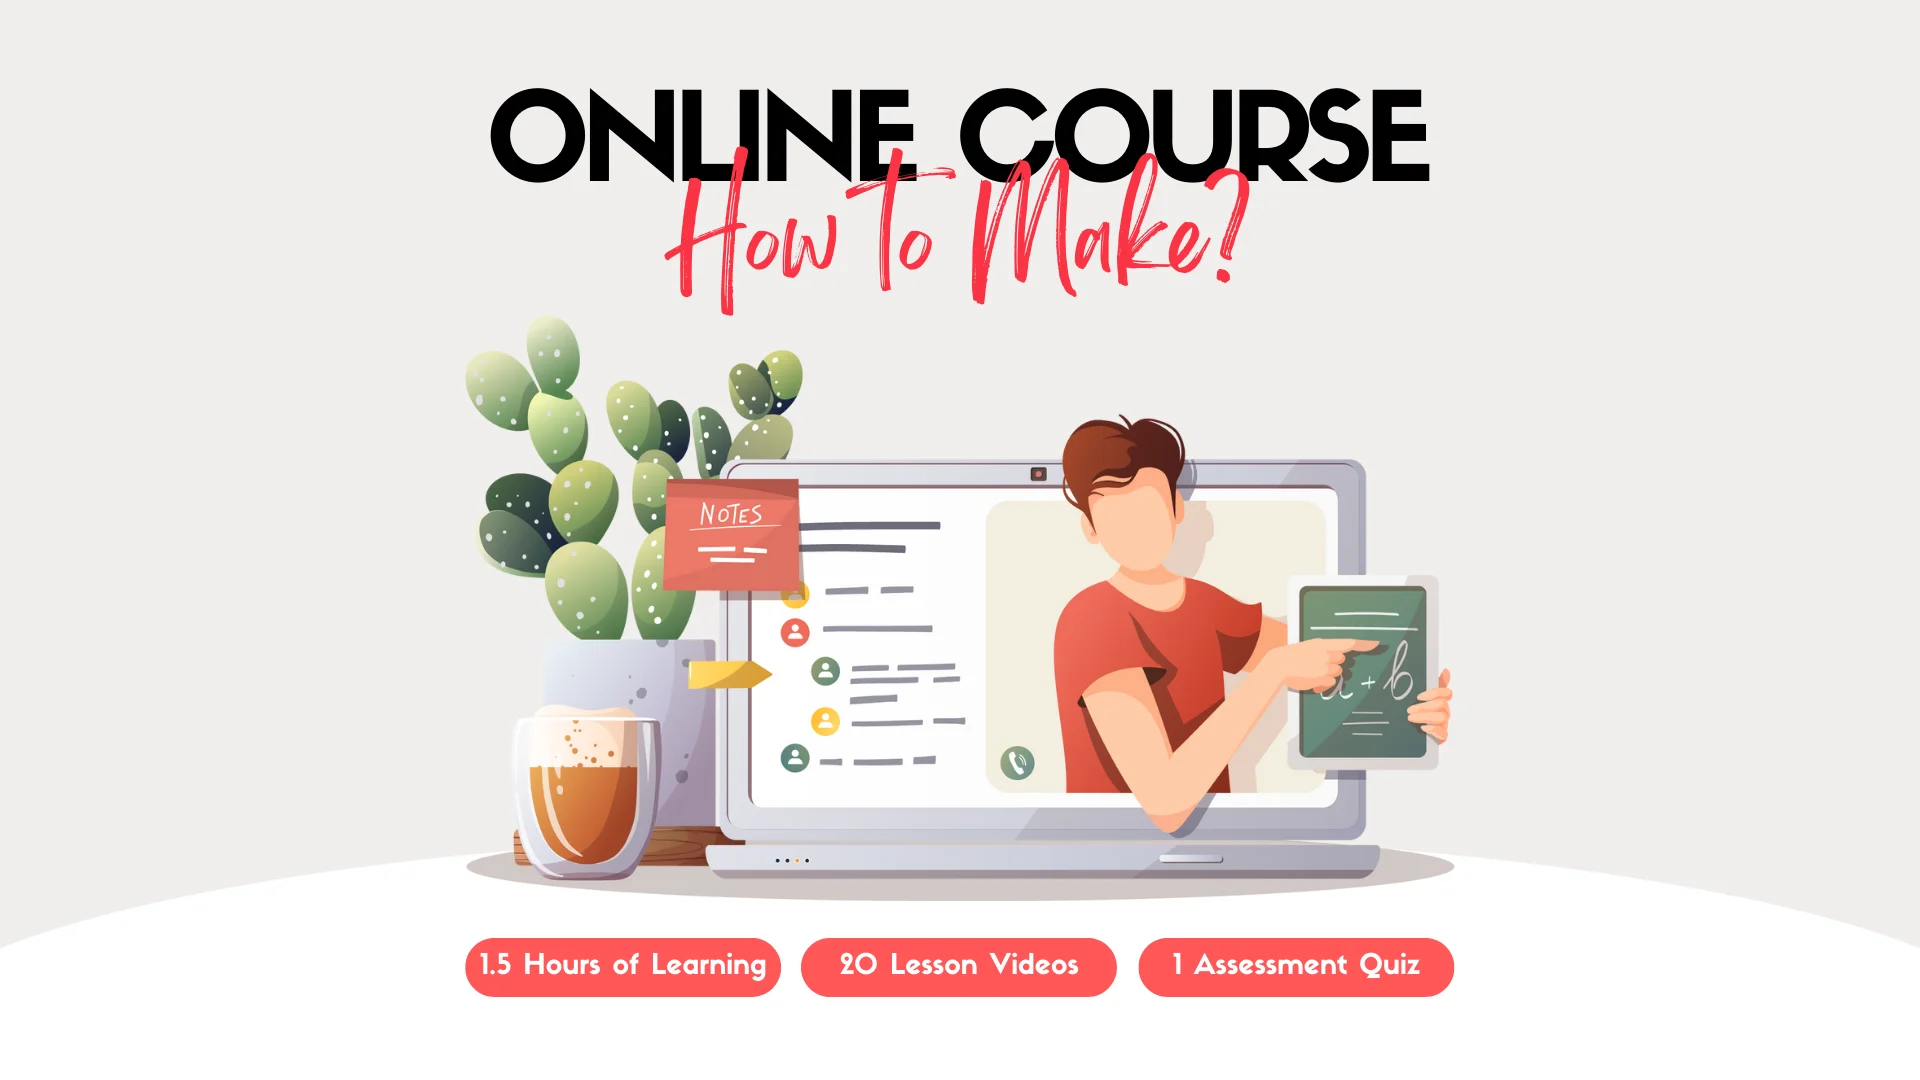 How to Make an Online Course